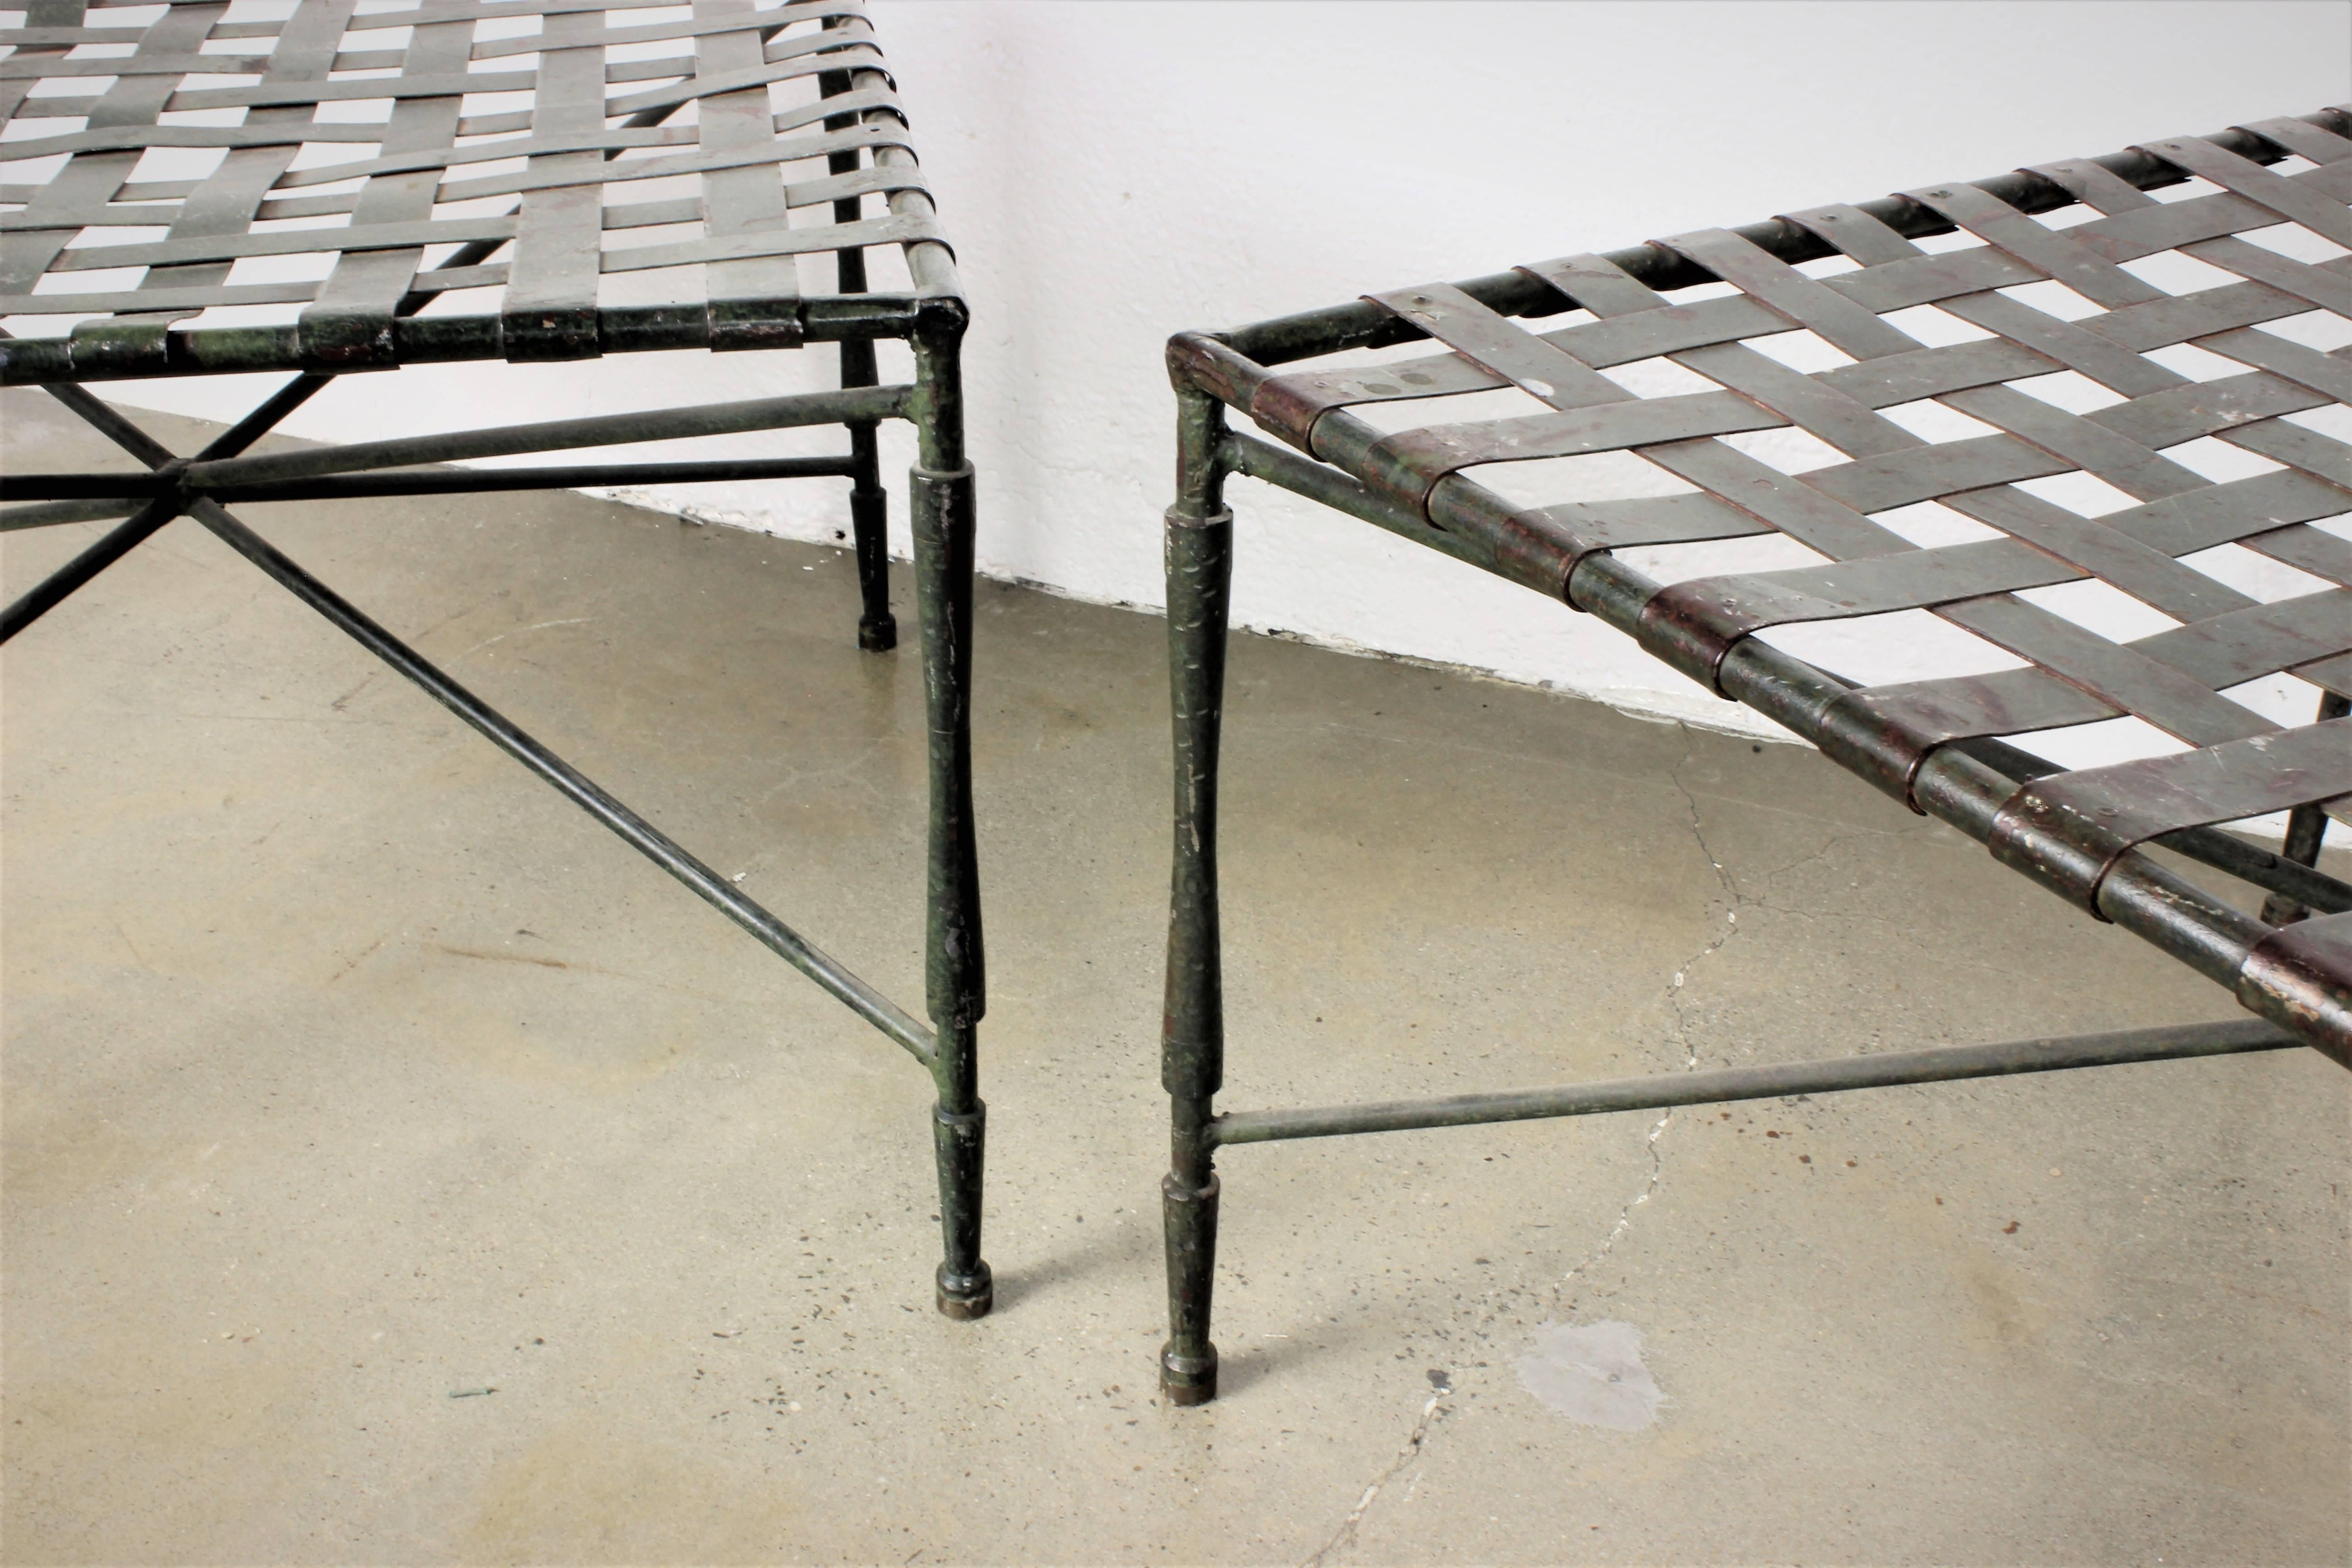 Pair of architectural iron benches or ottomans by John Salterini, 1950s. Great patina with aged bronze finish. Great for indoor or outdoor patio. Very sturdy and heavy. 

Whether furnishing a contemporary Soho loft or stylish post-war Park Avenue